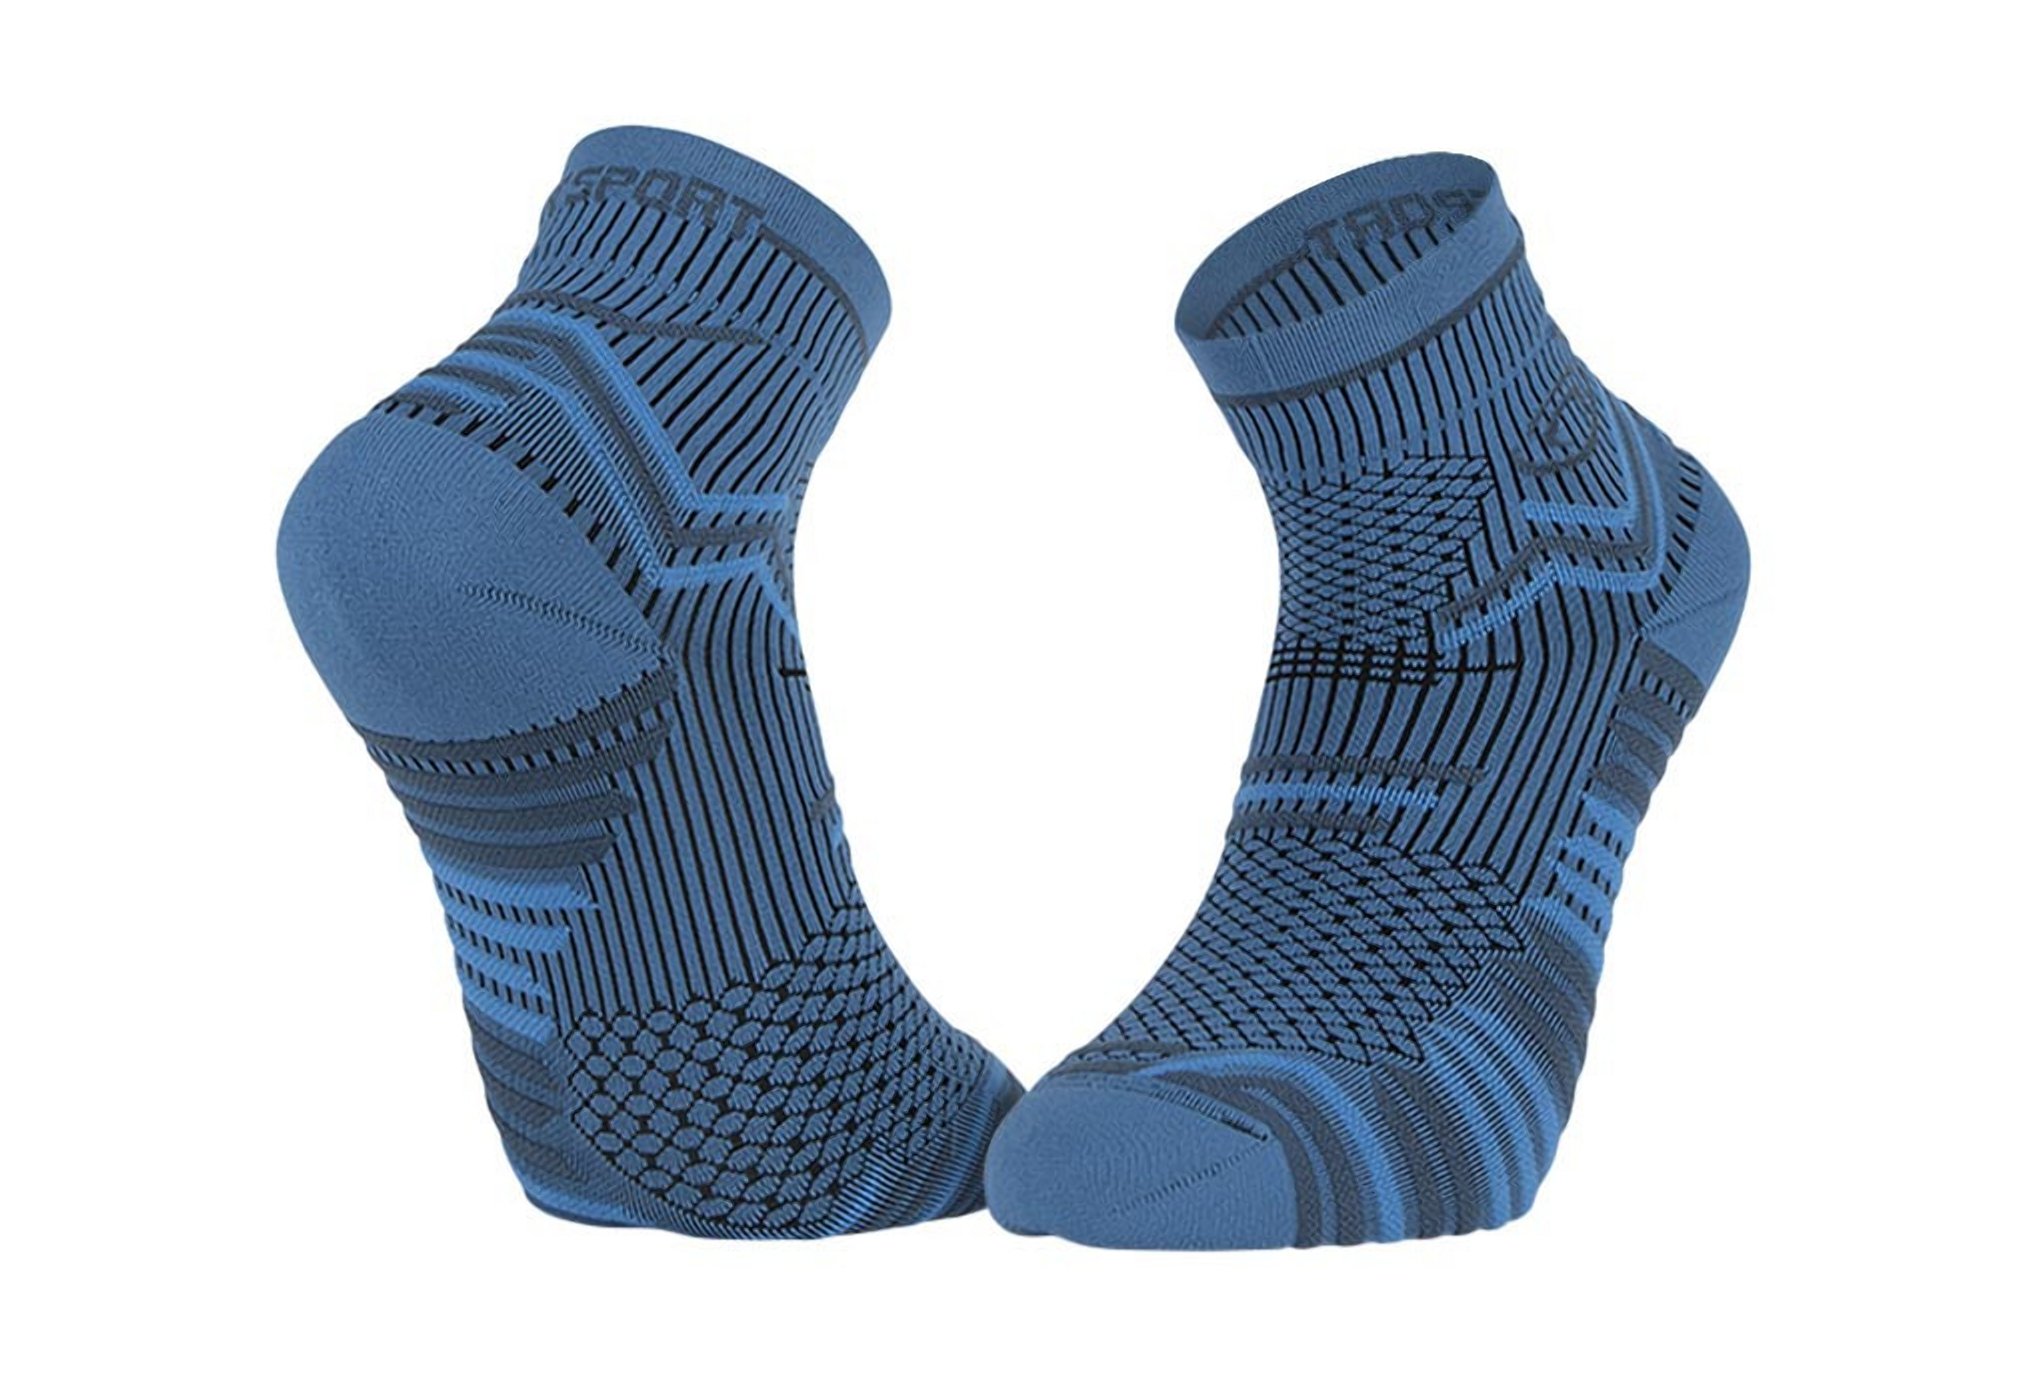 BV Sport Trail Ultra Chaussettes